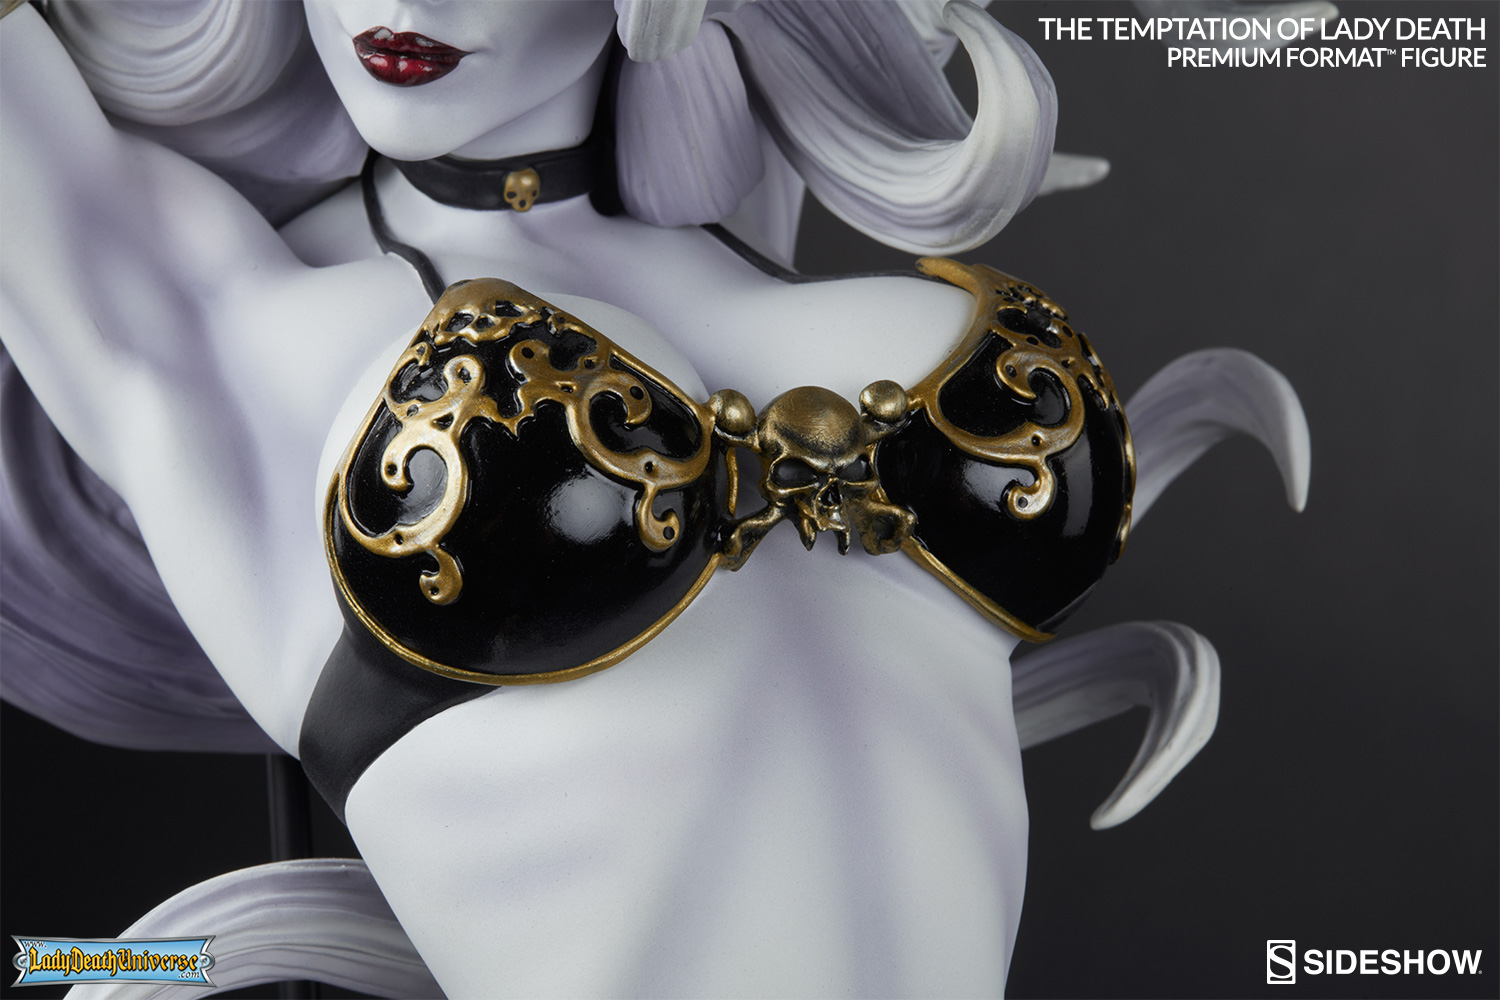 https://www.sideshowtoy.com/assets/products/300344-the-temptation-of-lady-death/lg/the-temptation-of-lady-death-premium-format-300344-10.jpg